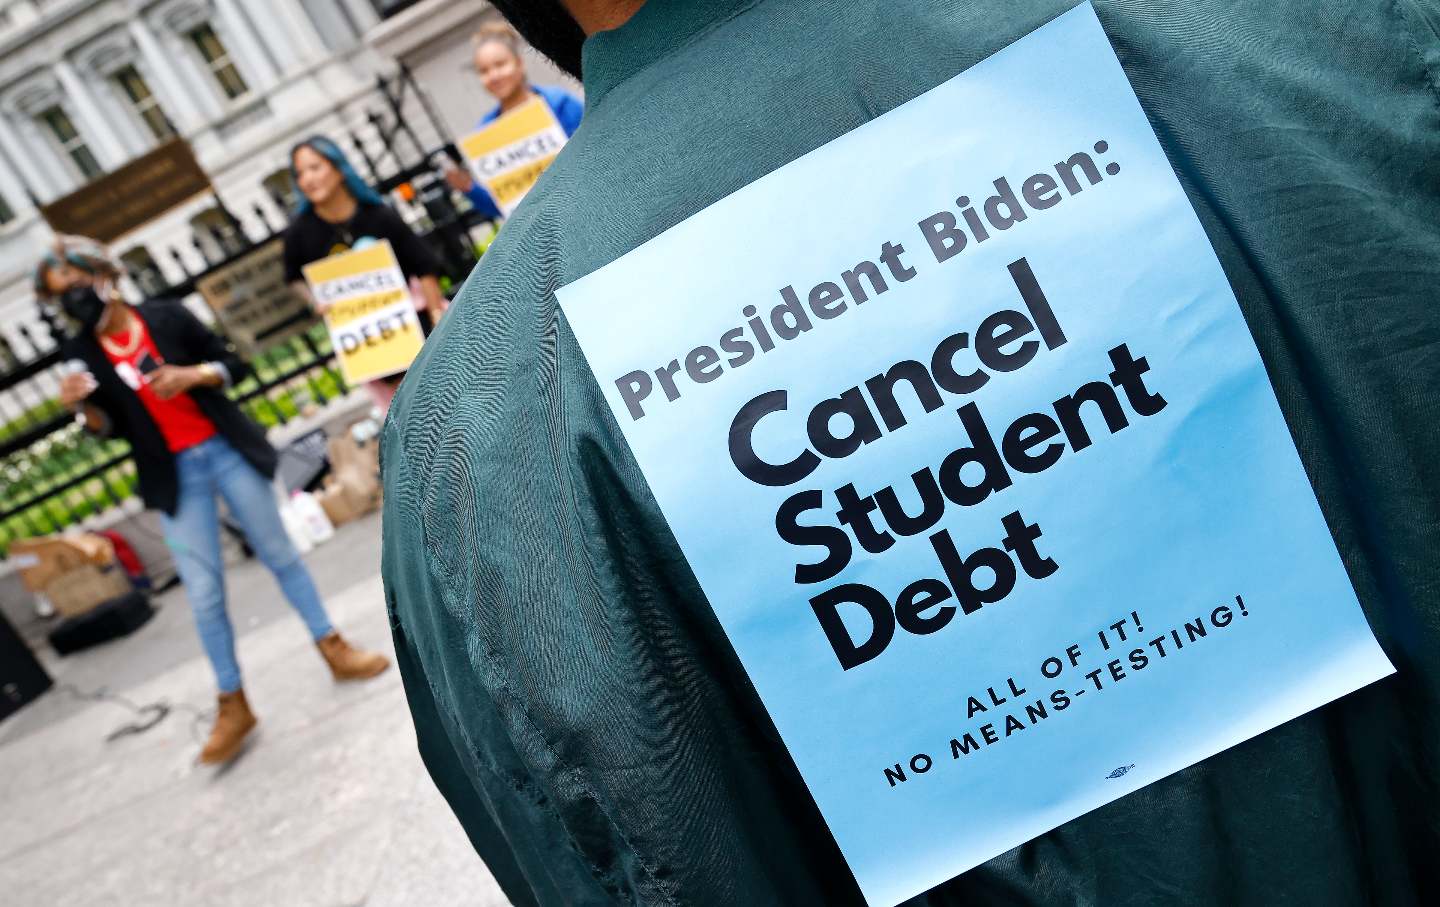 What’s Next for the Student Debt Cancellation Movement?